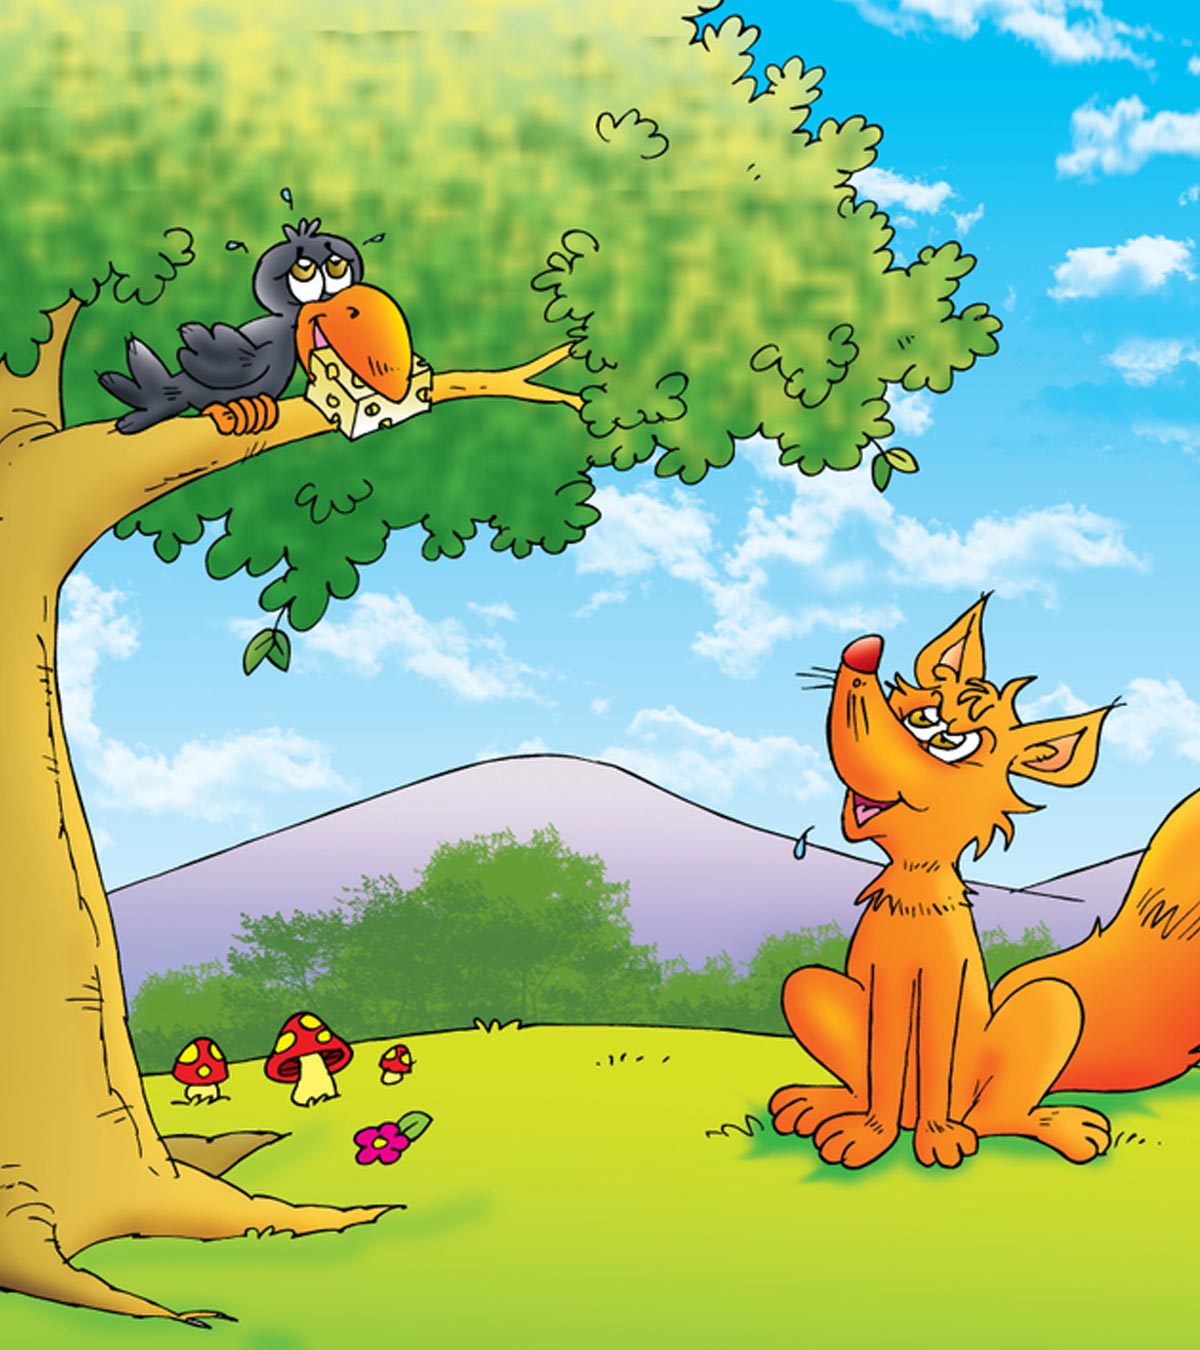 The Fox And The Crow Story For Kids In English, With Moral